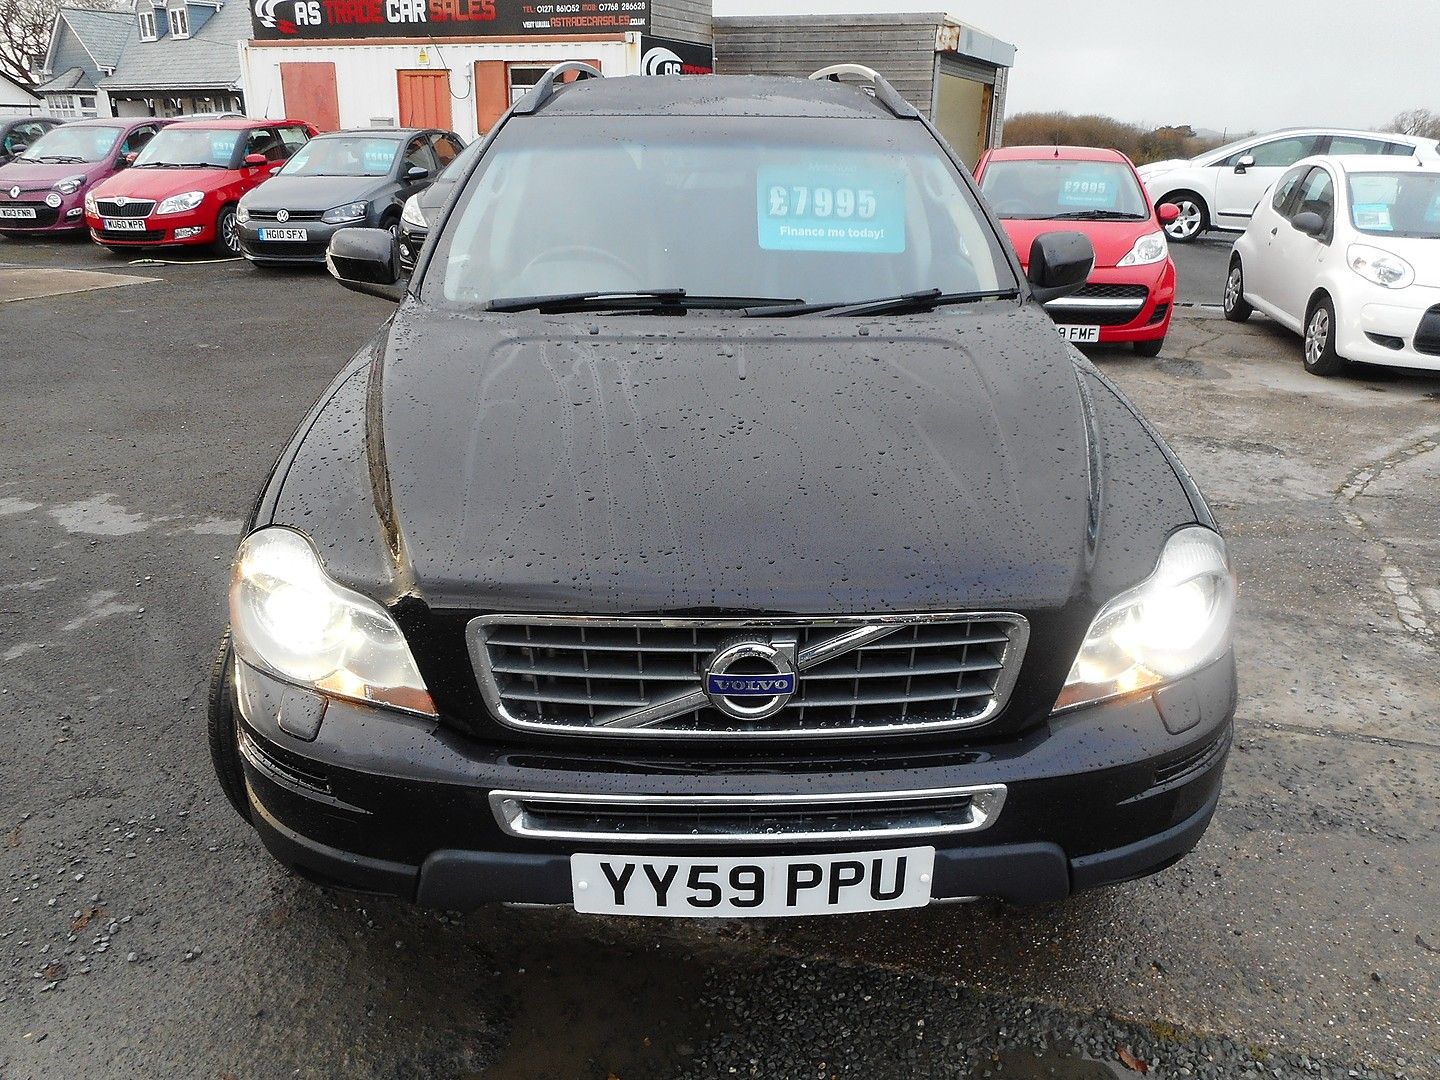 VOLVO XC90 D5 AWD (185 bhp) Executive Geartronic (2009) - Picture 2